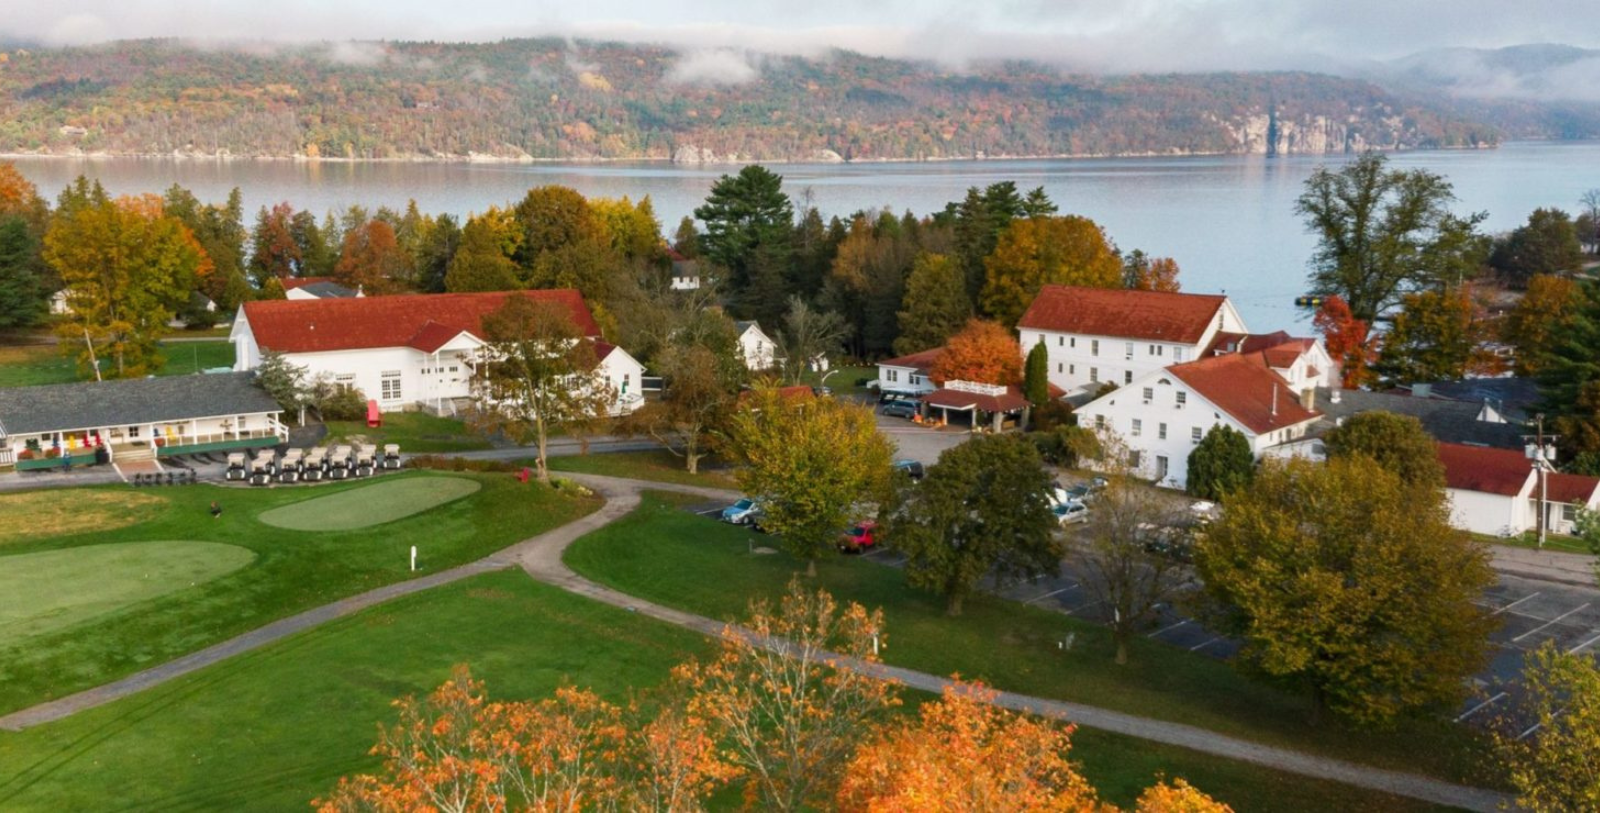 Spend a day exploring Fort Ticonderoga, the Crowne Point State Historic Site, Mount Philo State Park, or the Lake Champlain Maritime Museum.